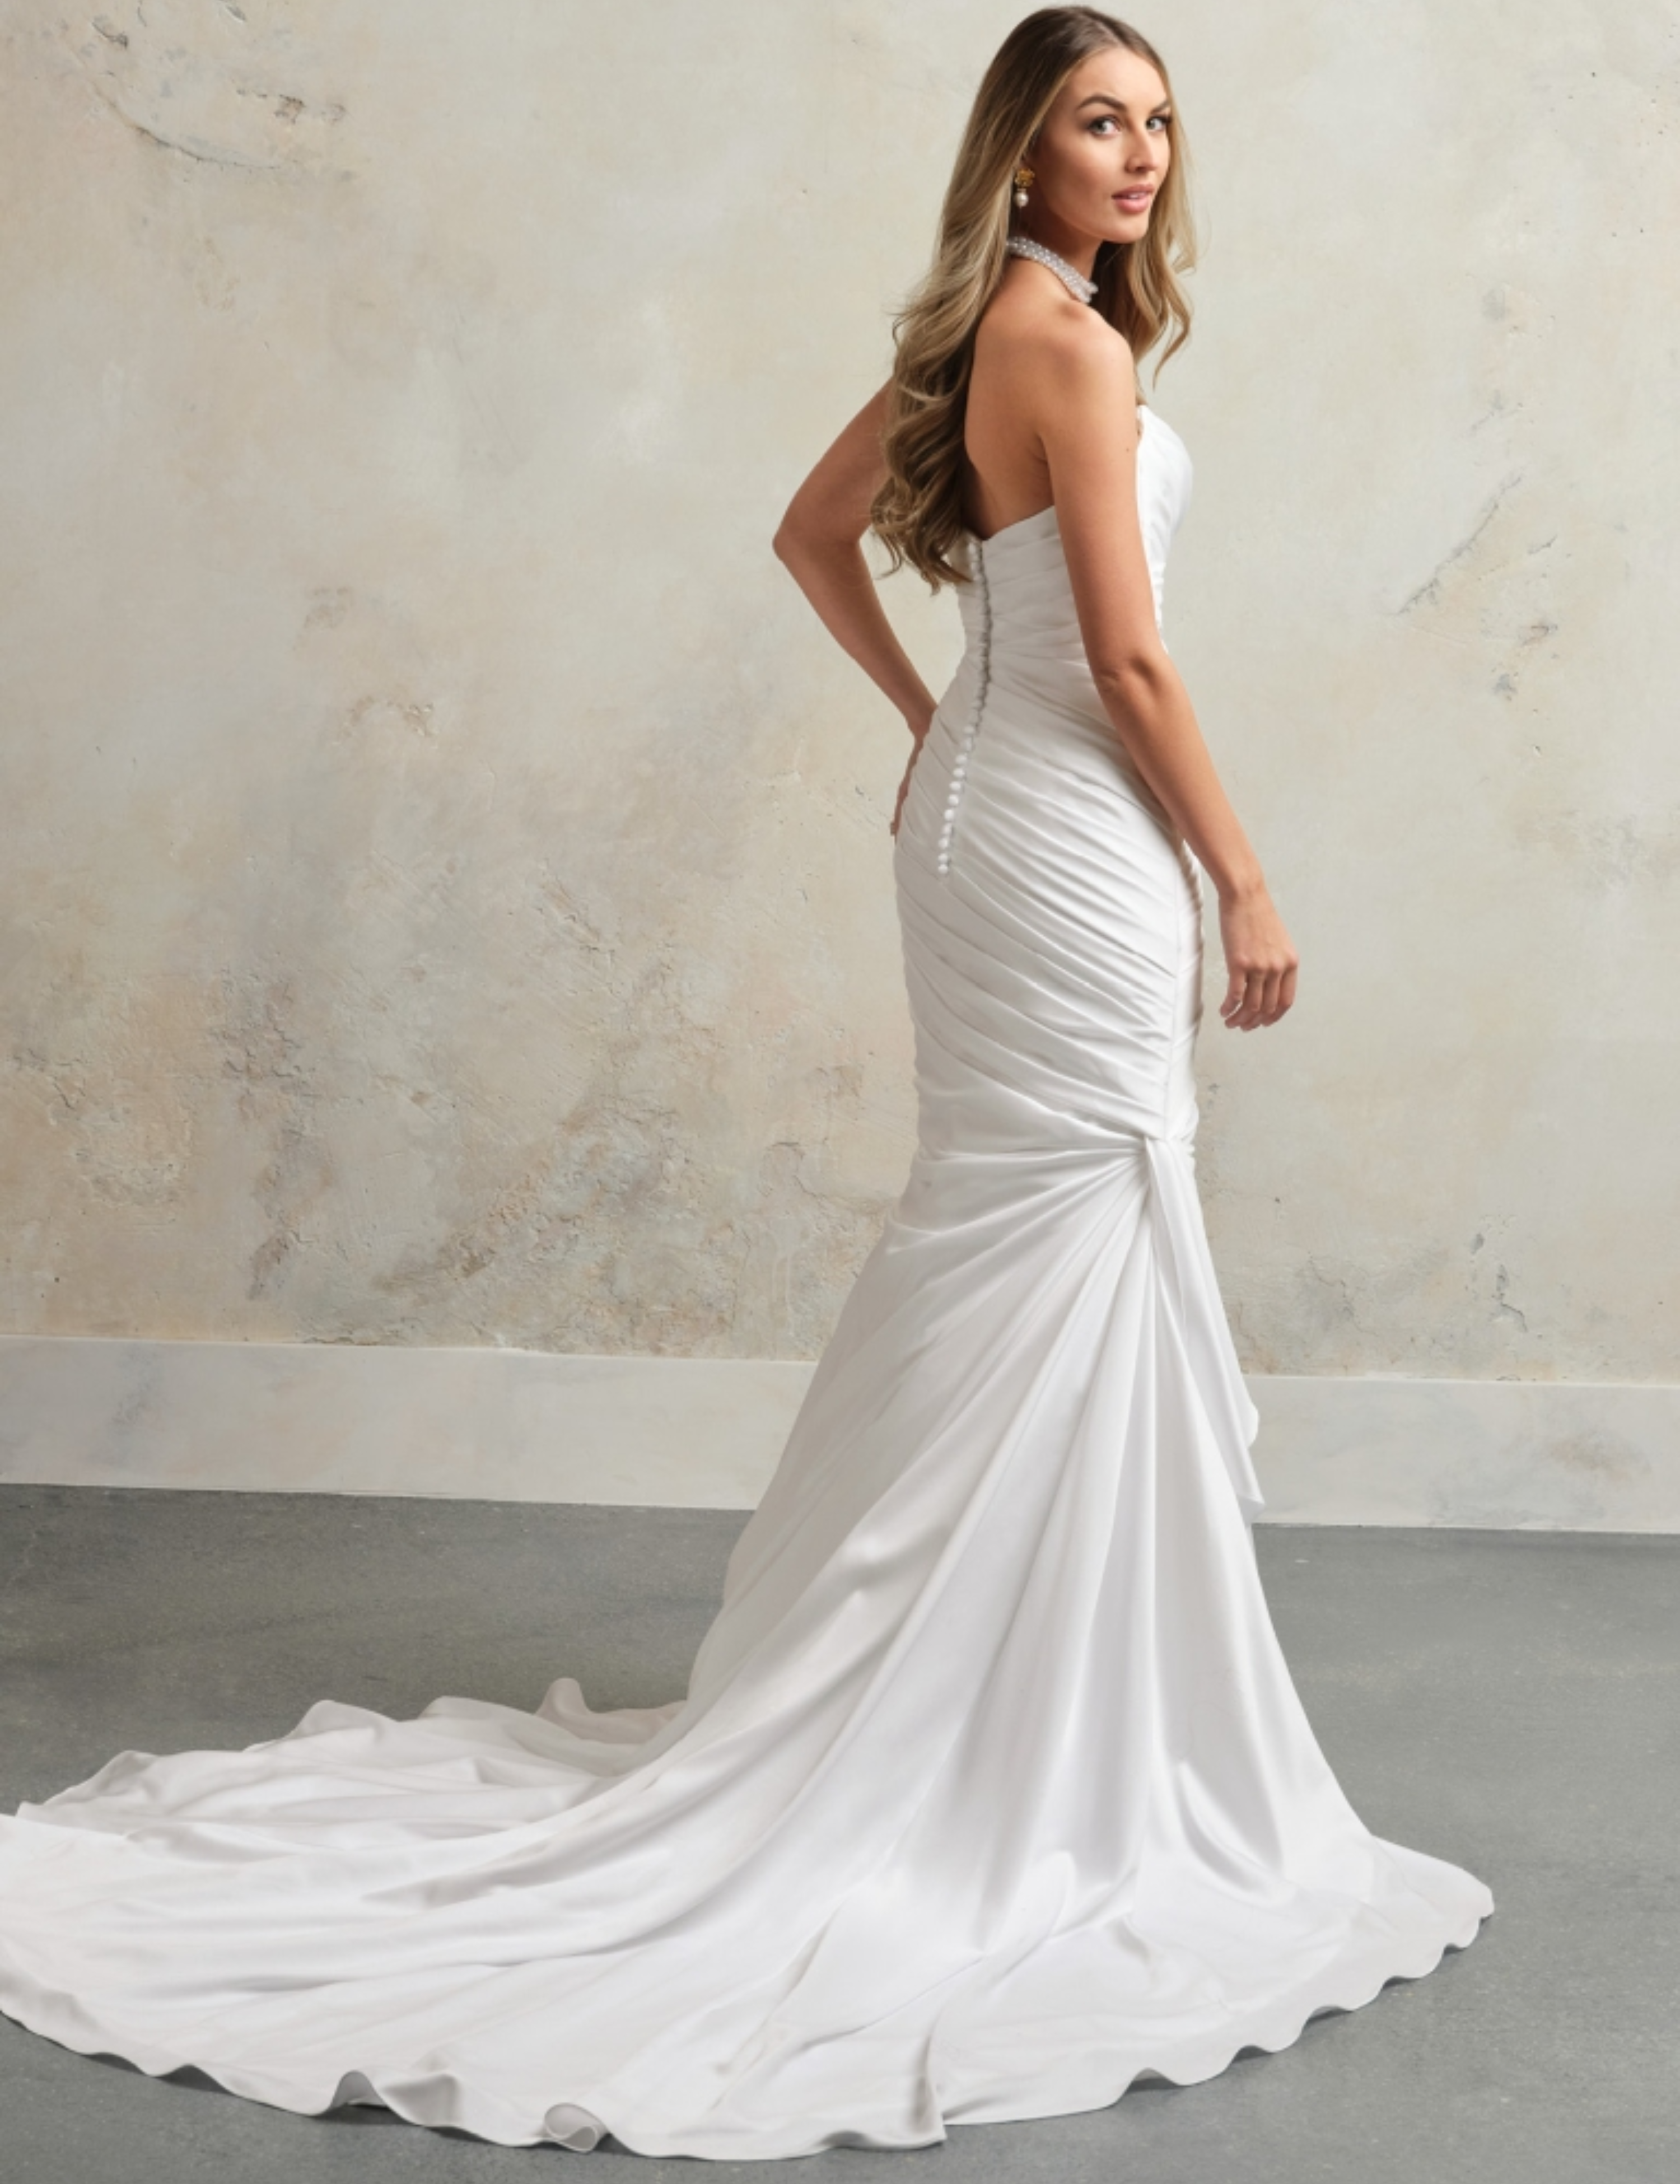 Dramatically Draped Satin Fit-and-Flare Wedding Dress by Maggie Sottero - Image 2